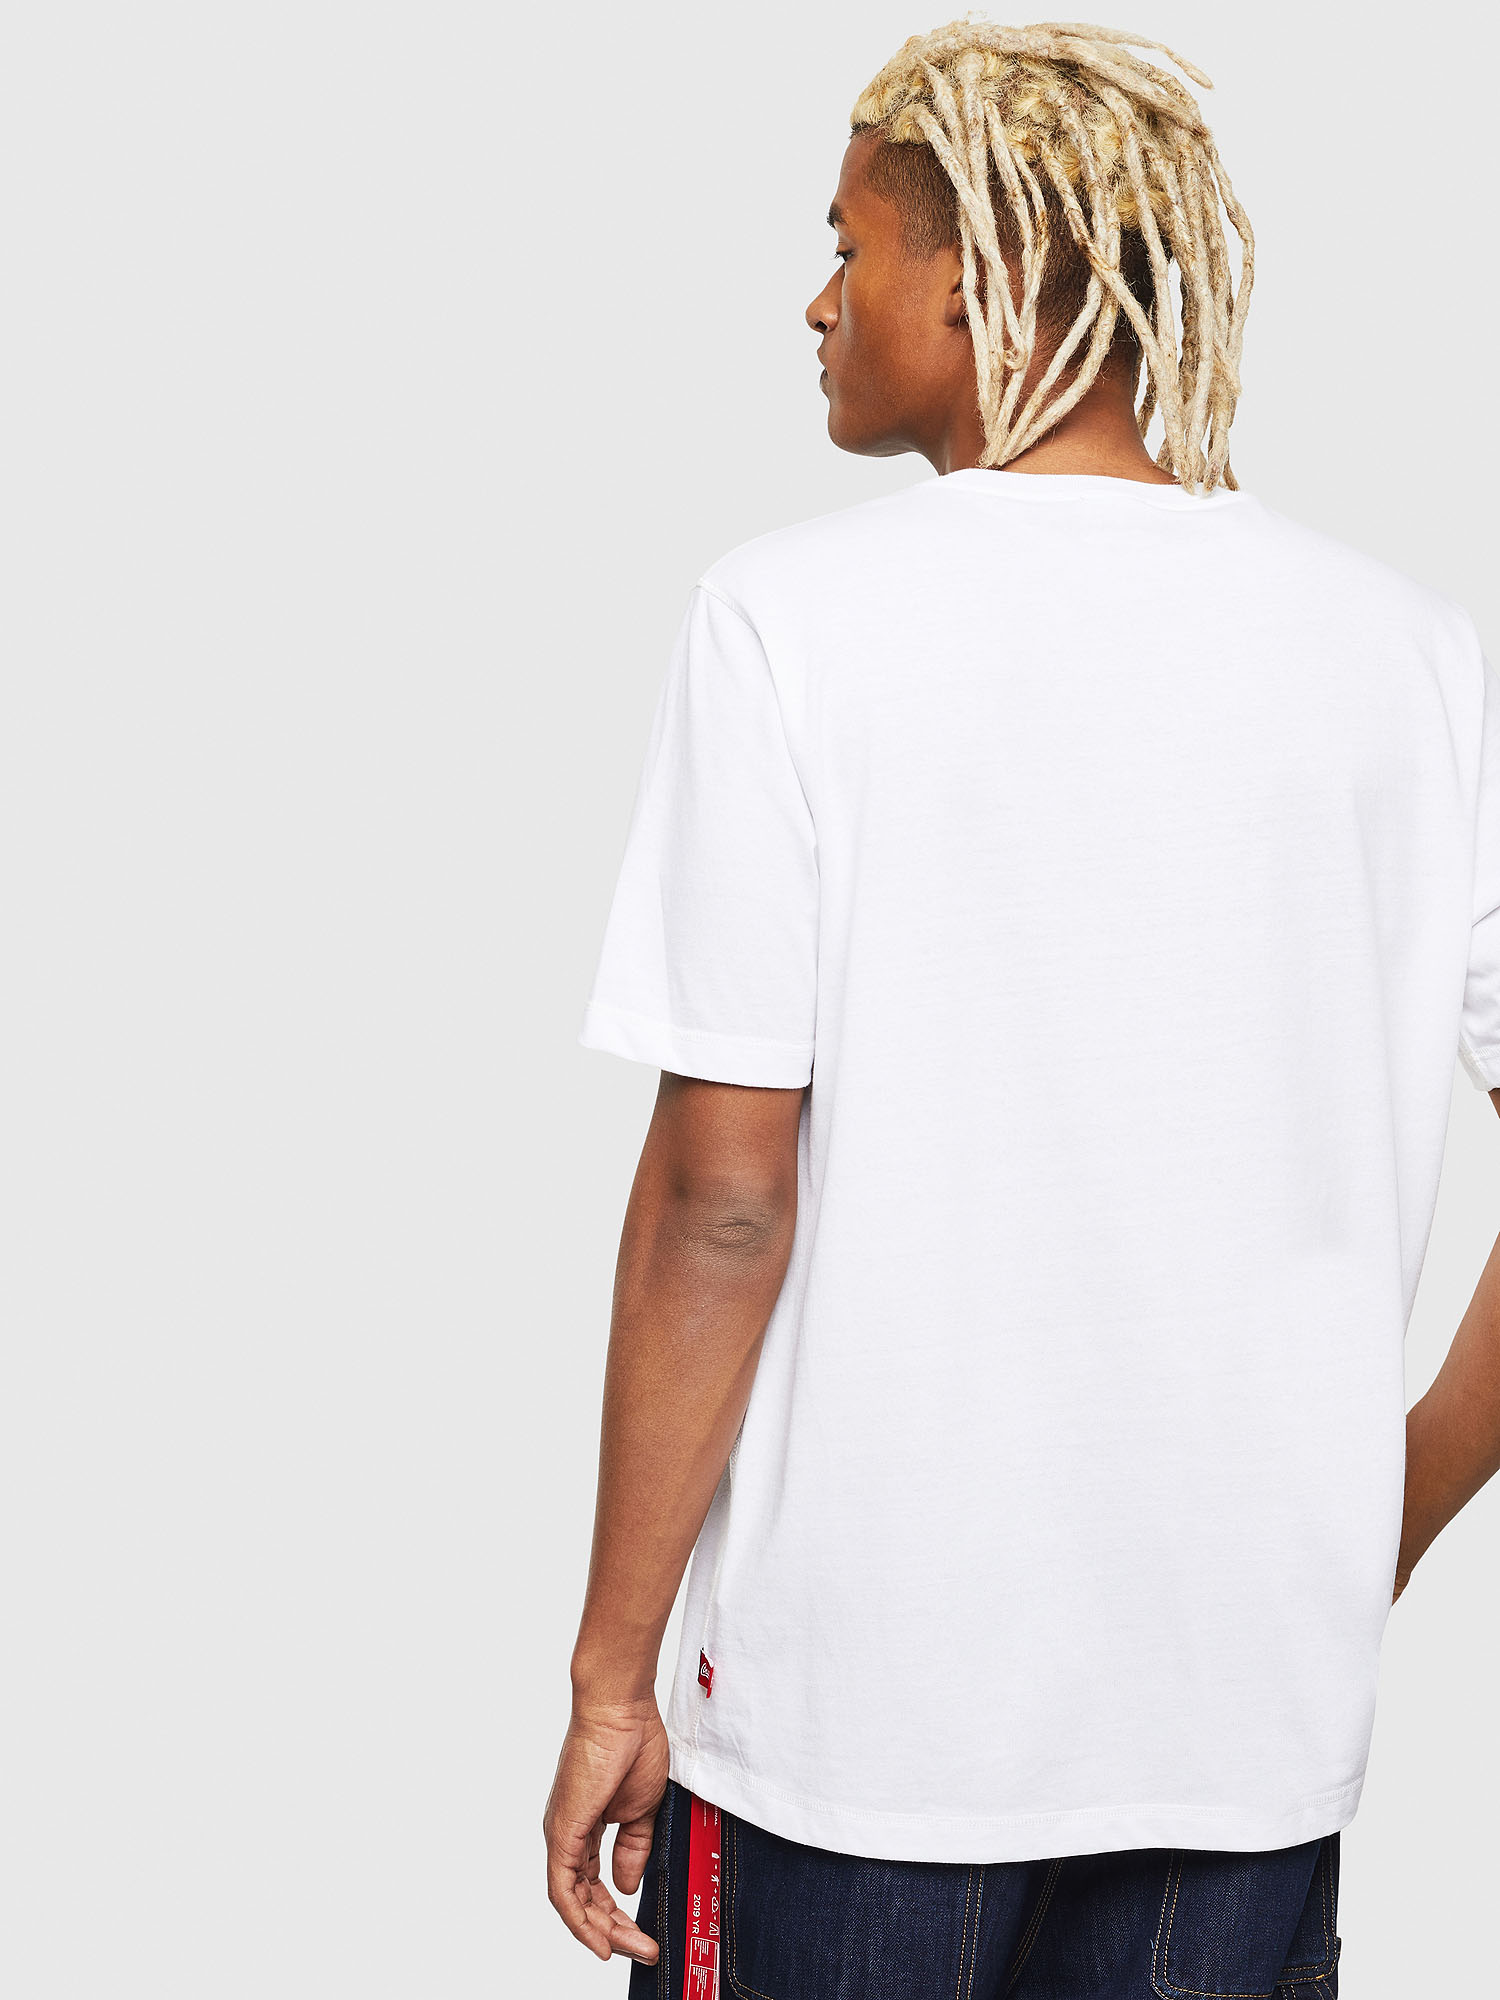 CC-T-JUST-COLA: Recycled fabric White T-Shirt | Diesel x Coca-Cola